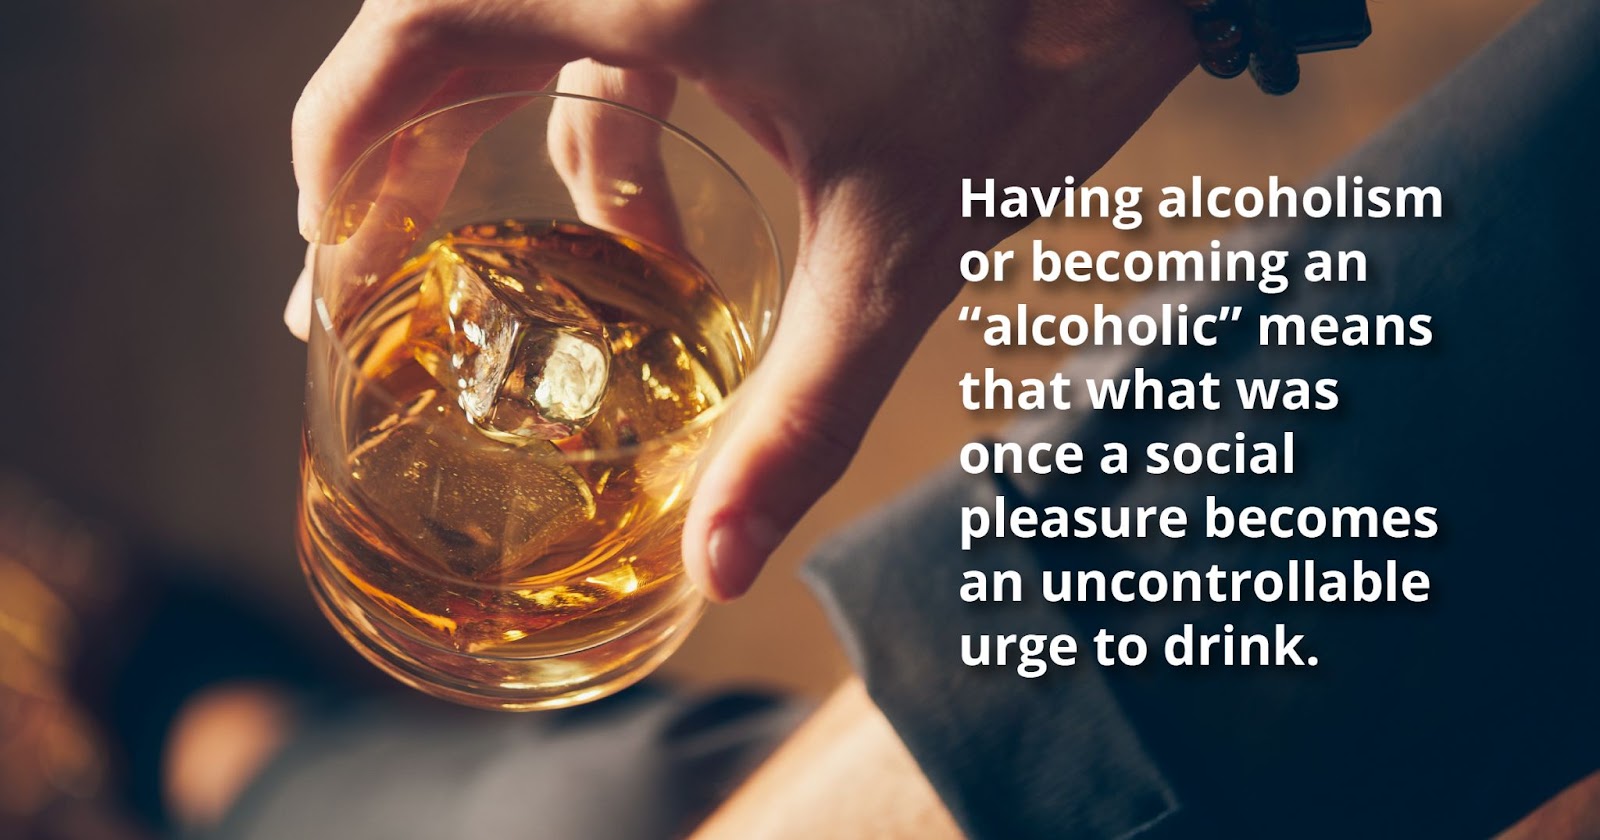 Having alcoholism or becoming an alcoholic means that what was once a social pleasure becomes an uncontrollable urge to drink